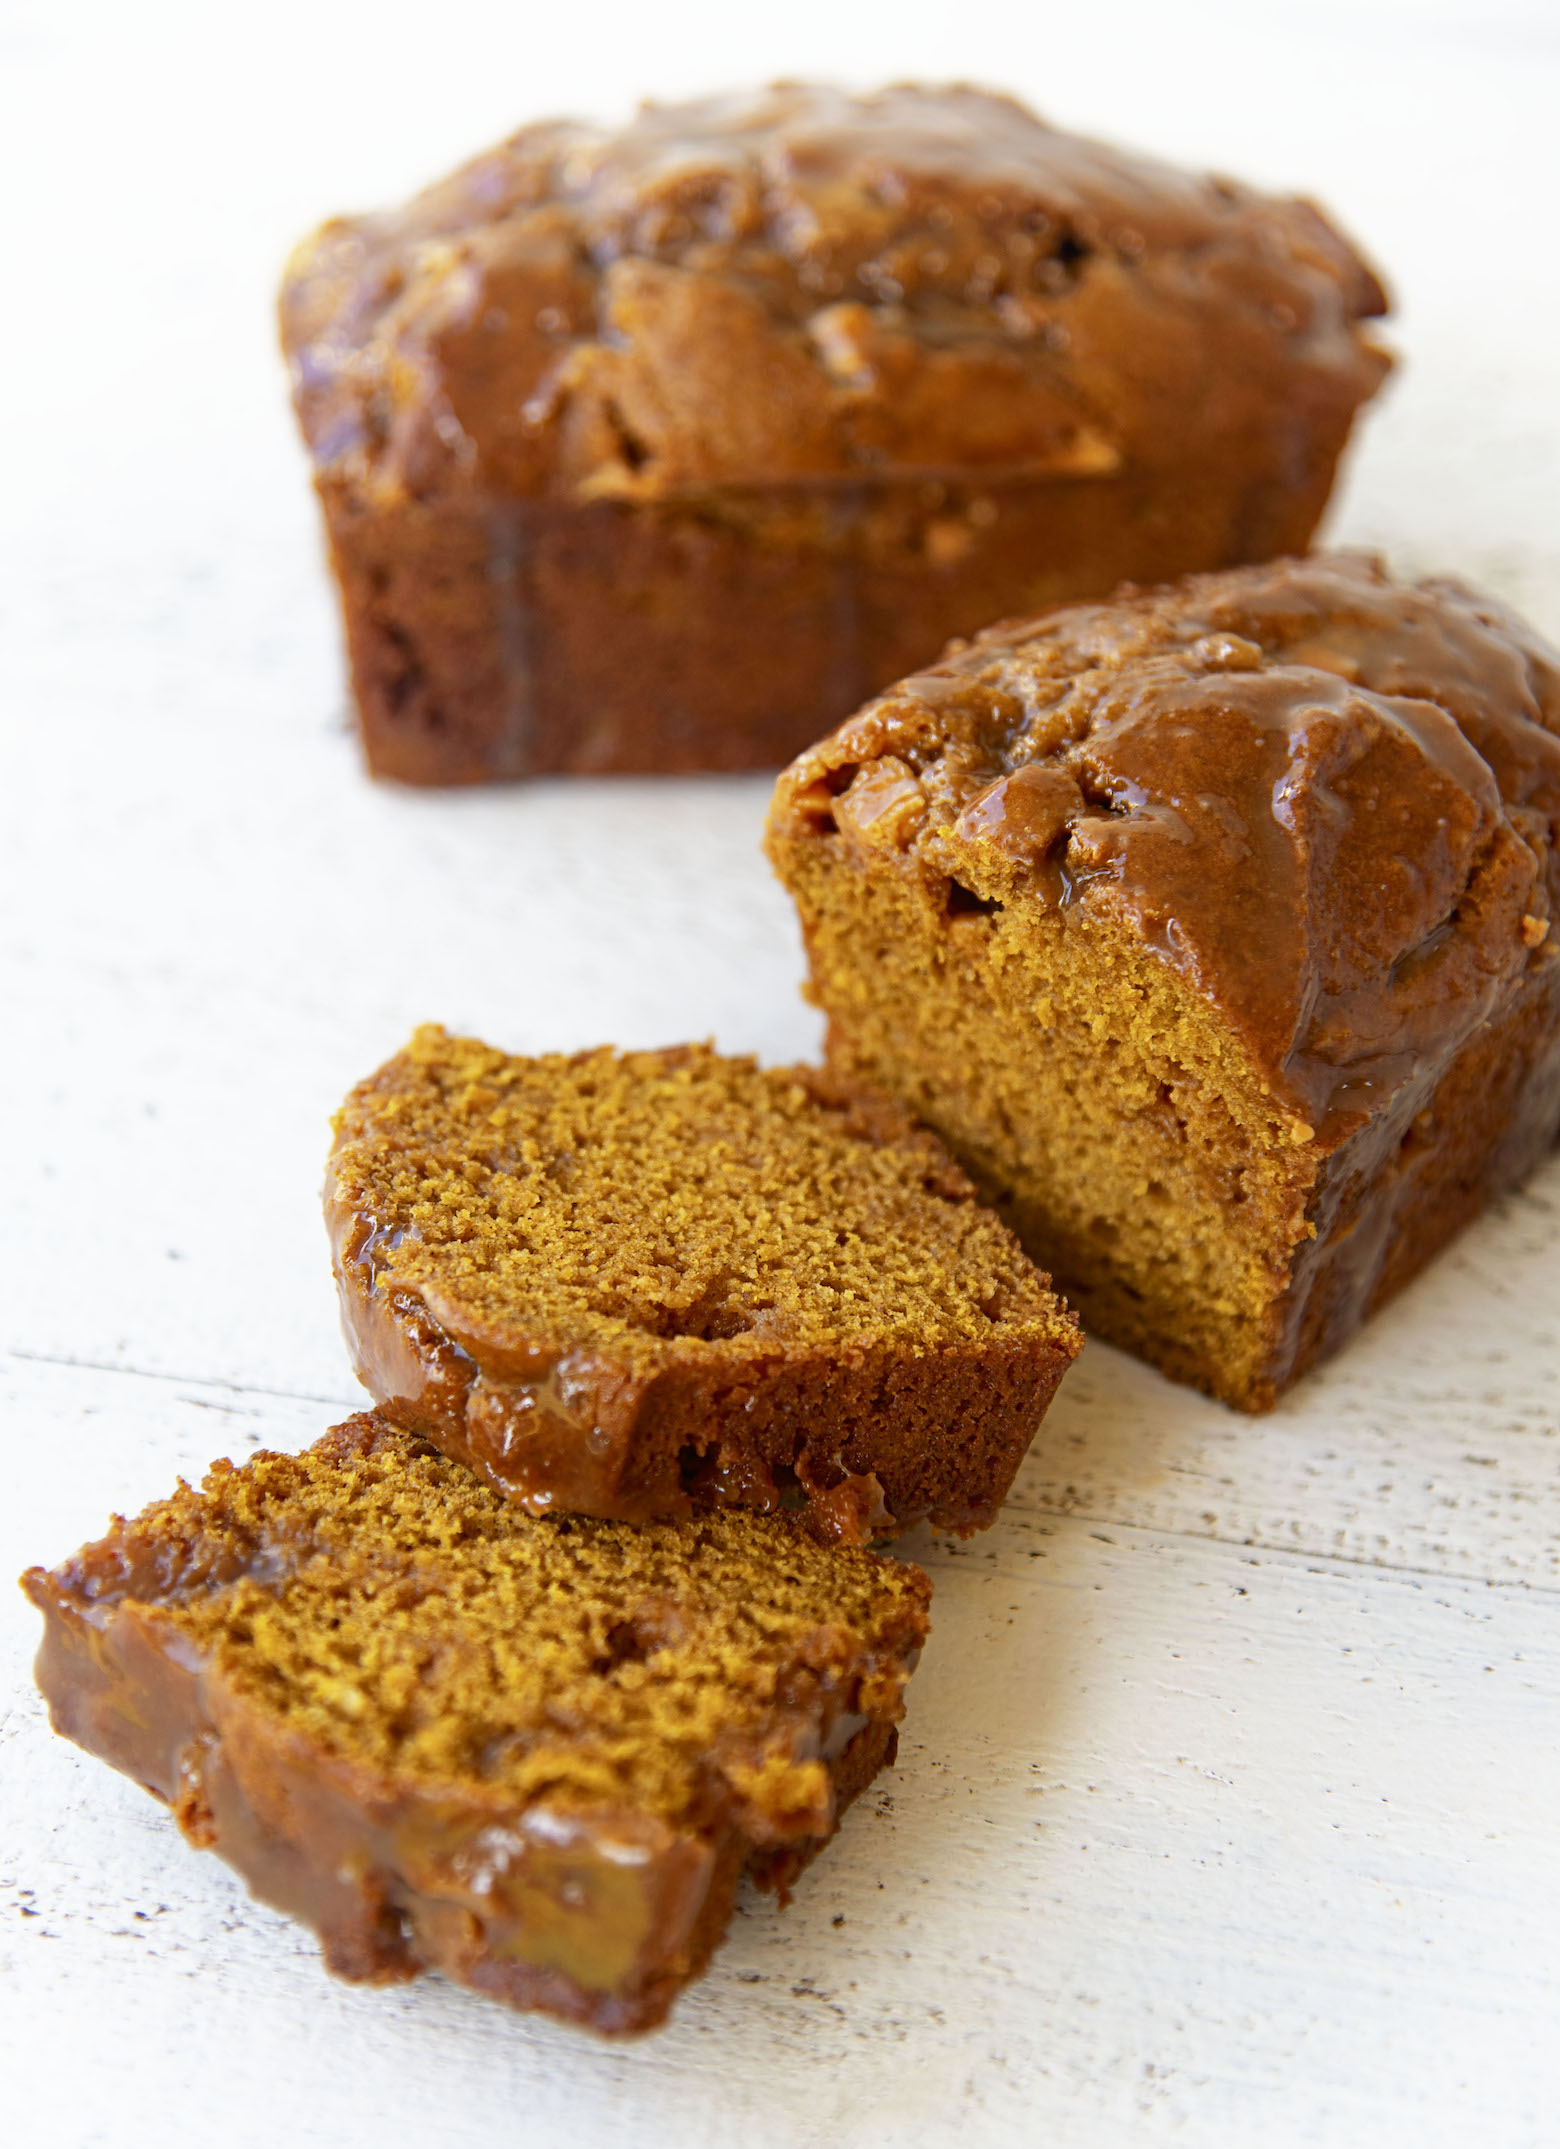 One whole pumpkin bread in the background and one bread up front with two slices cut out of it.